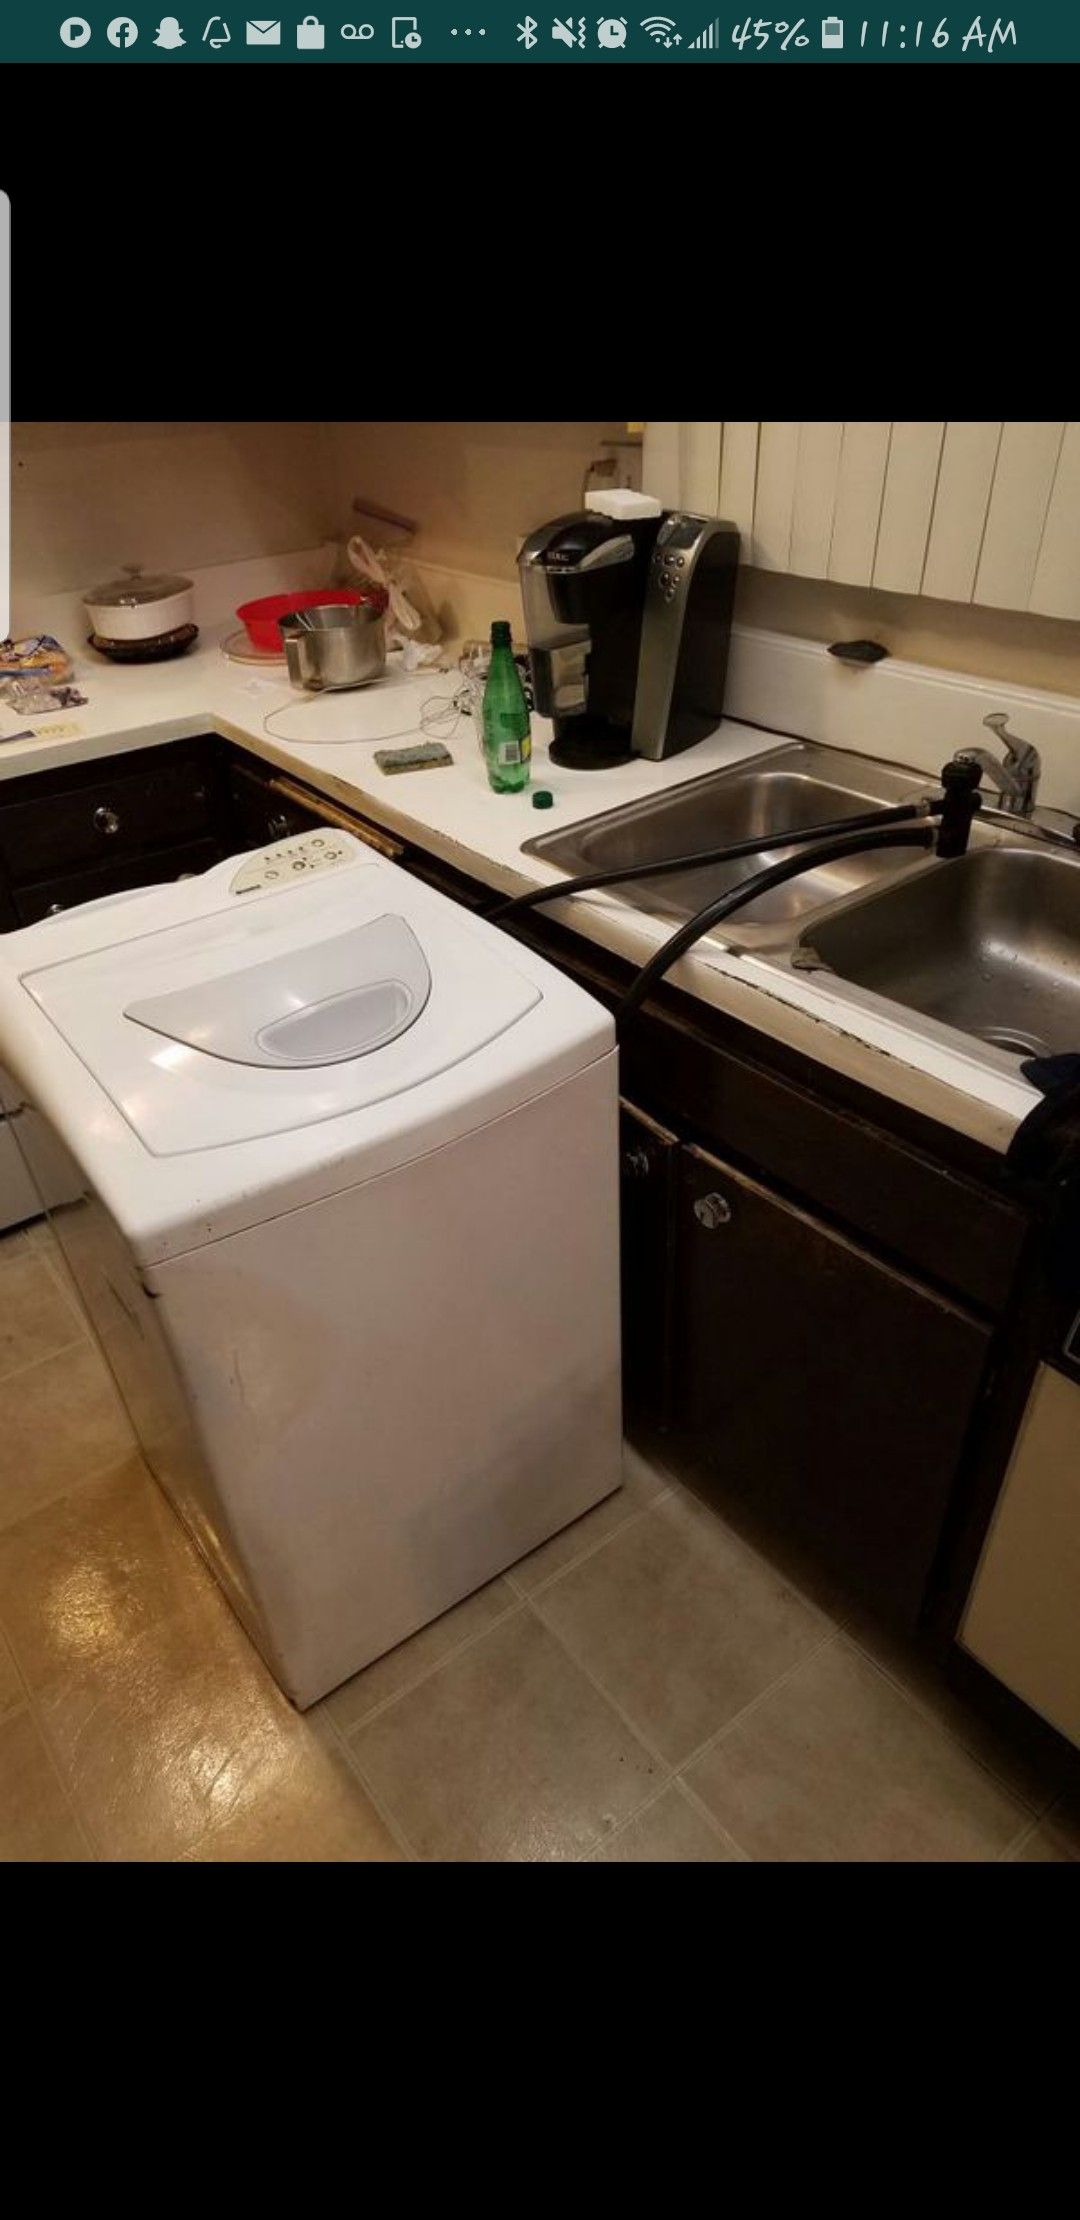 Kenmore apartment size washer on wheels. $50